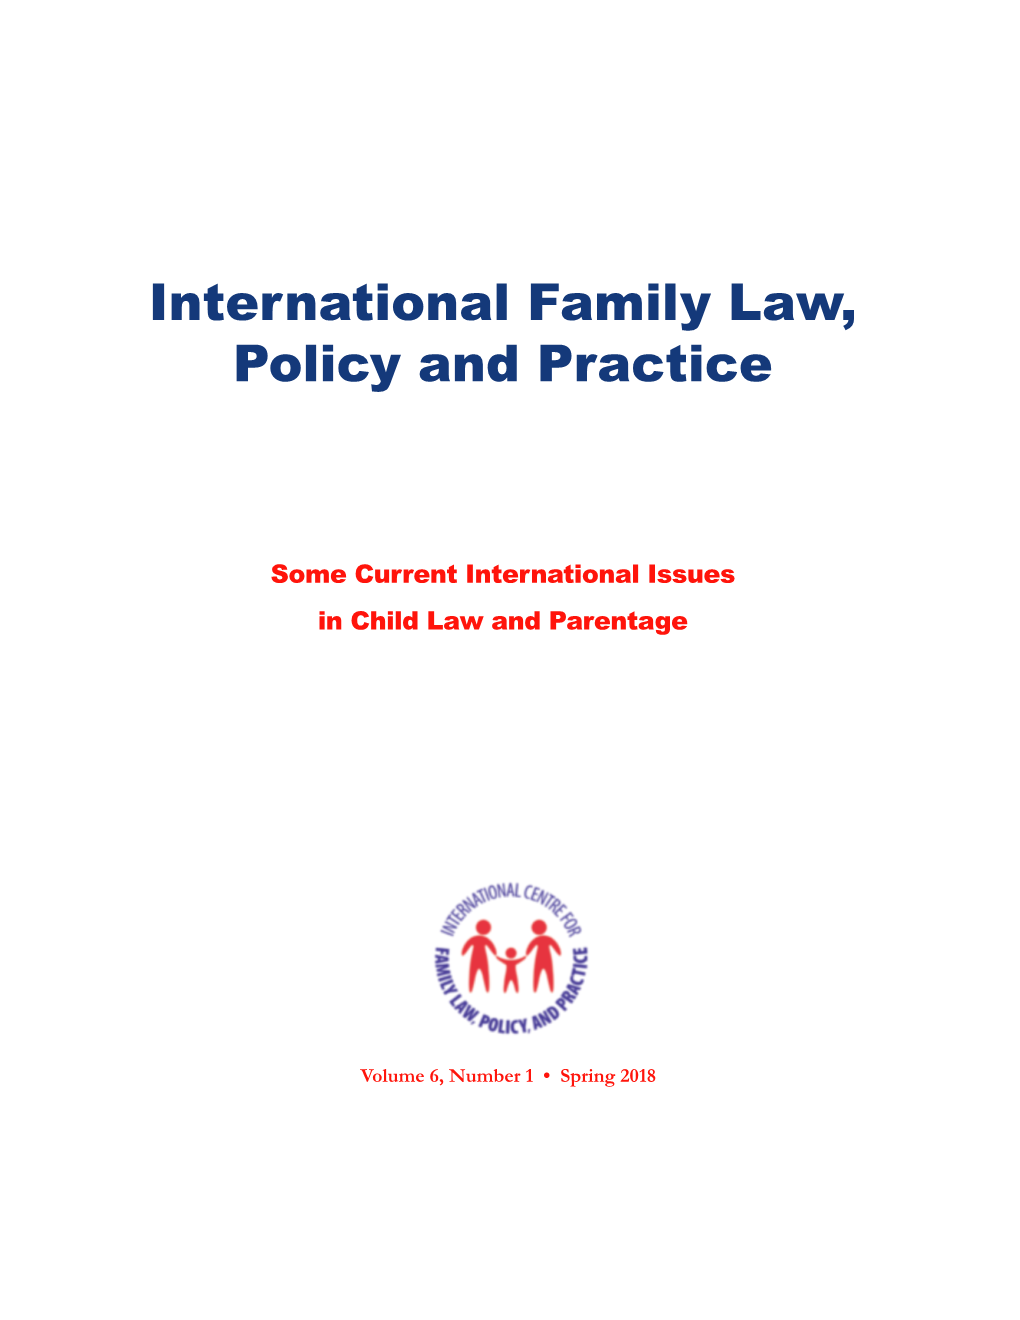 International Family Law, Policy and Practice